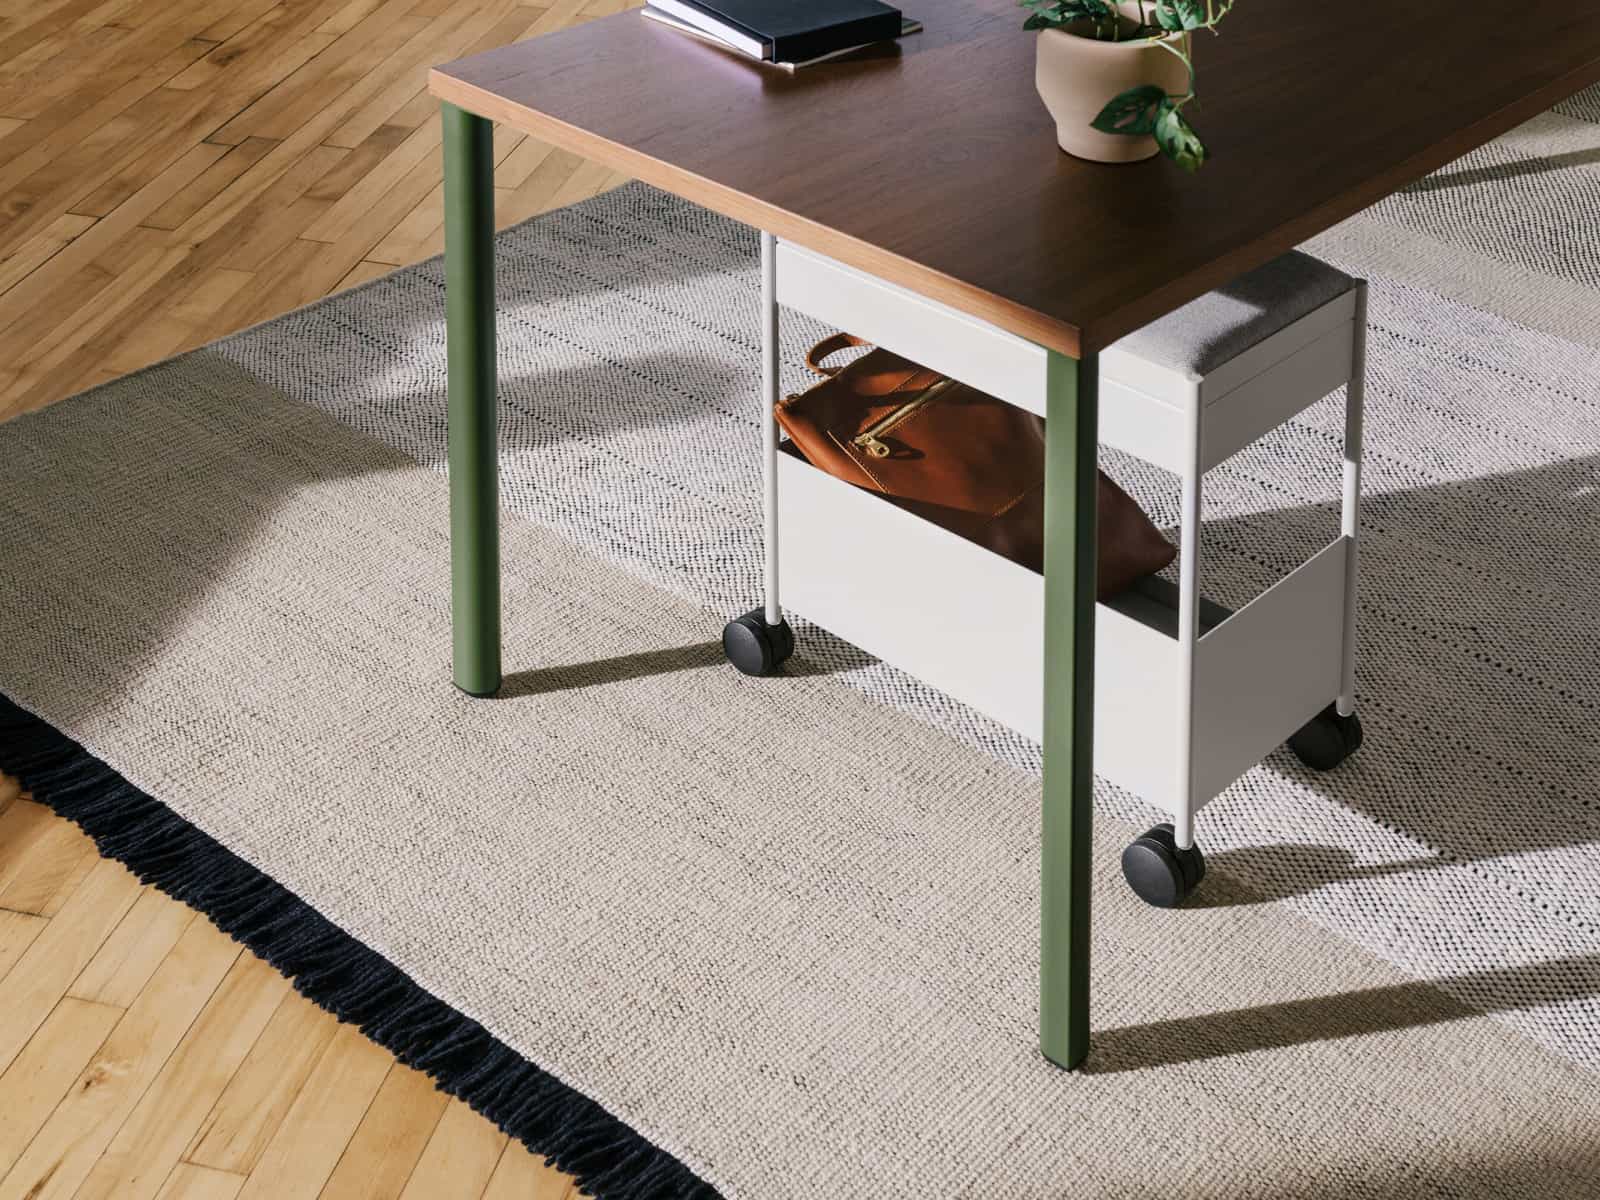 A grey, individual OE1 Storage Trolley with casters, nesting under an OE1 Rectangular Table with dark brown surface and green legs.